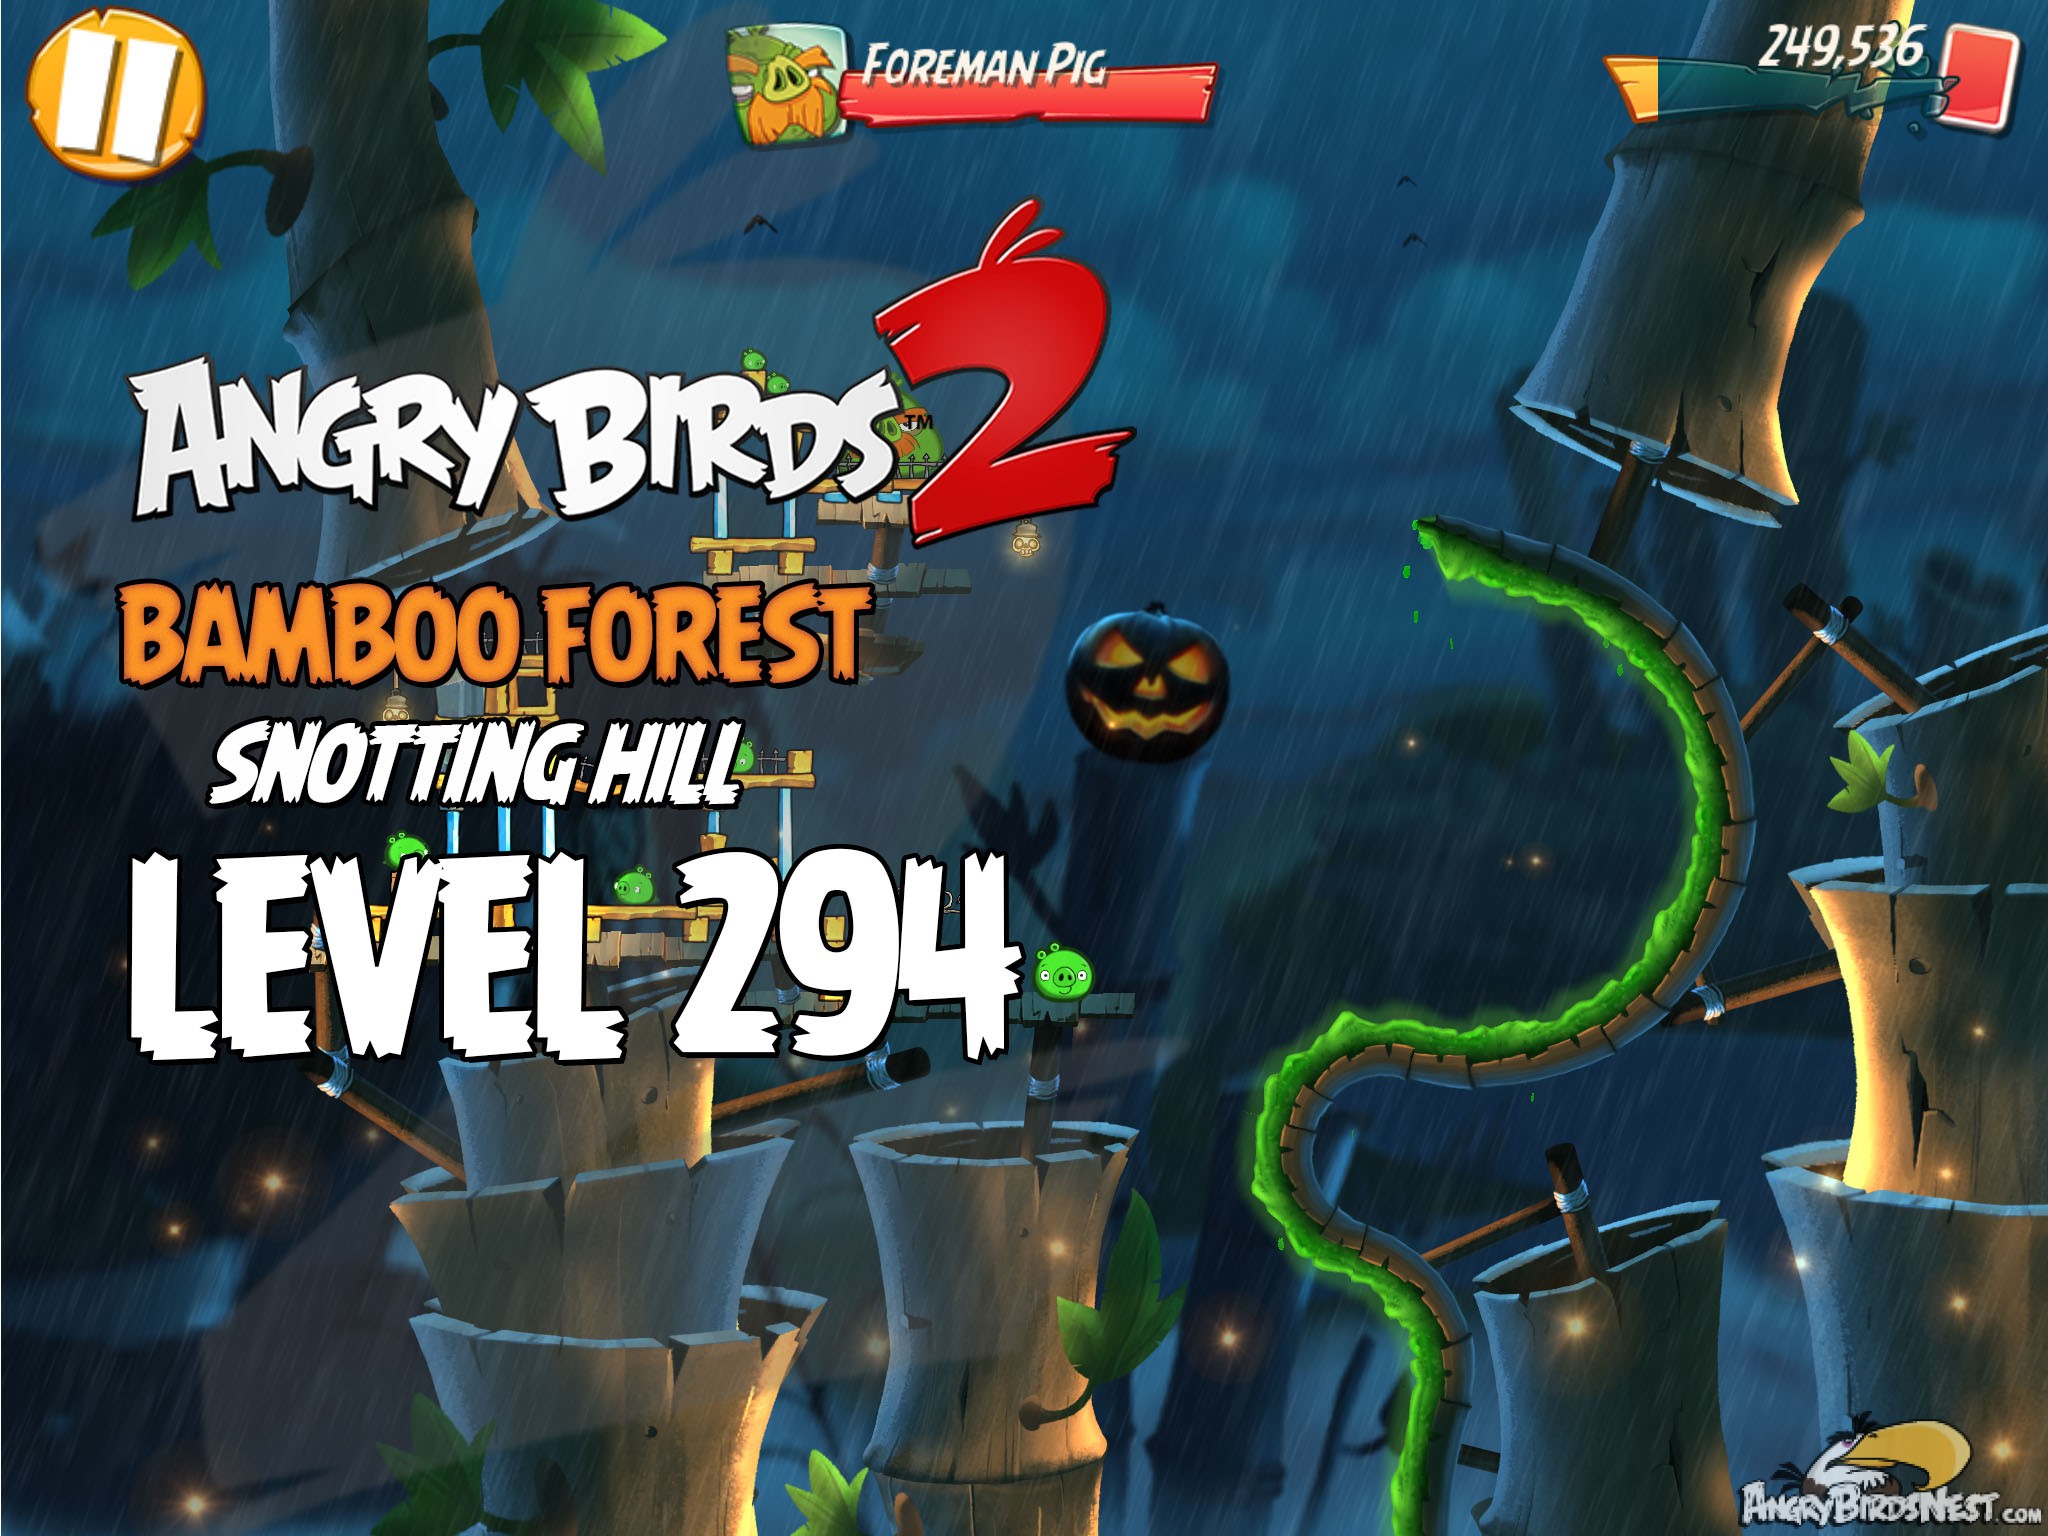 Angry Birds 2 Bambbo Forest Snotting Hill Level 294